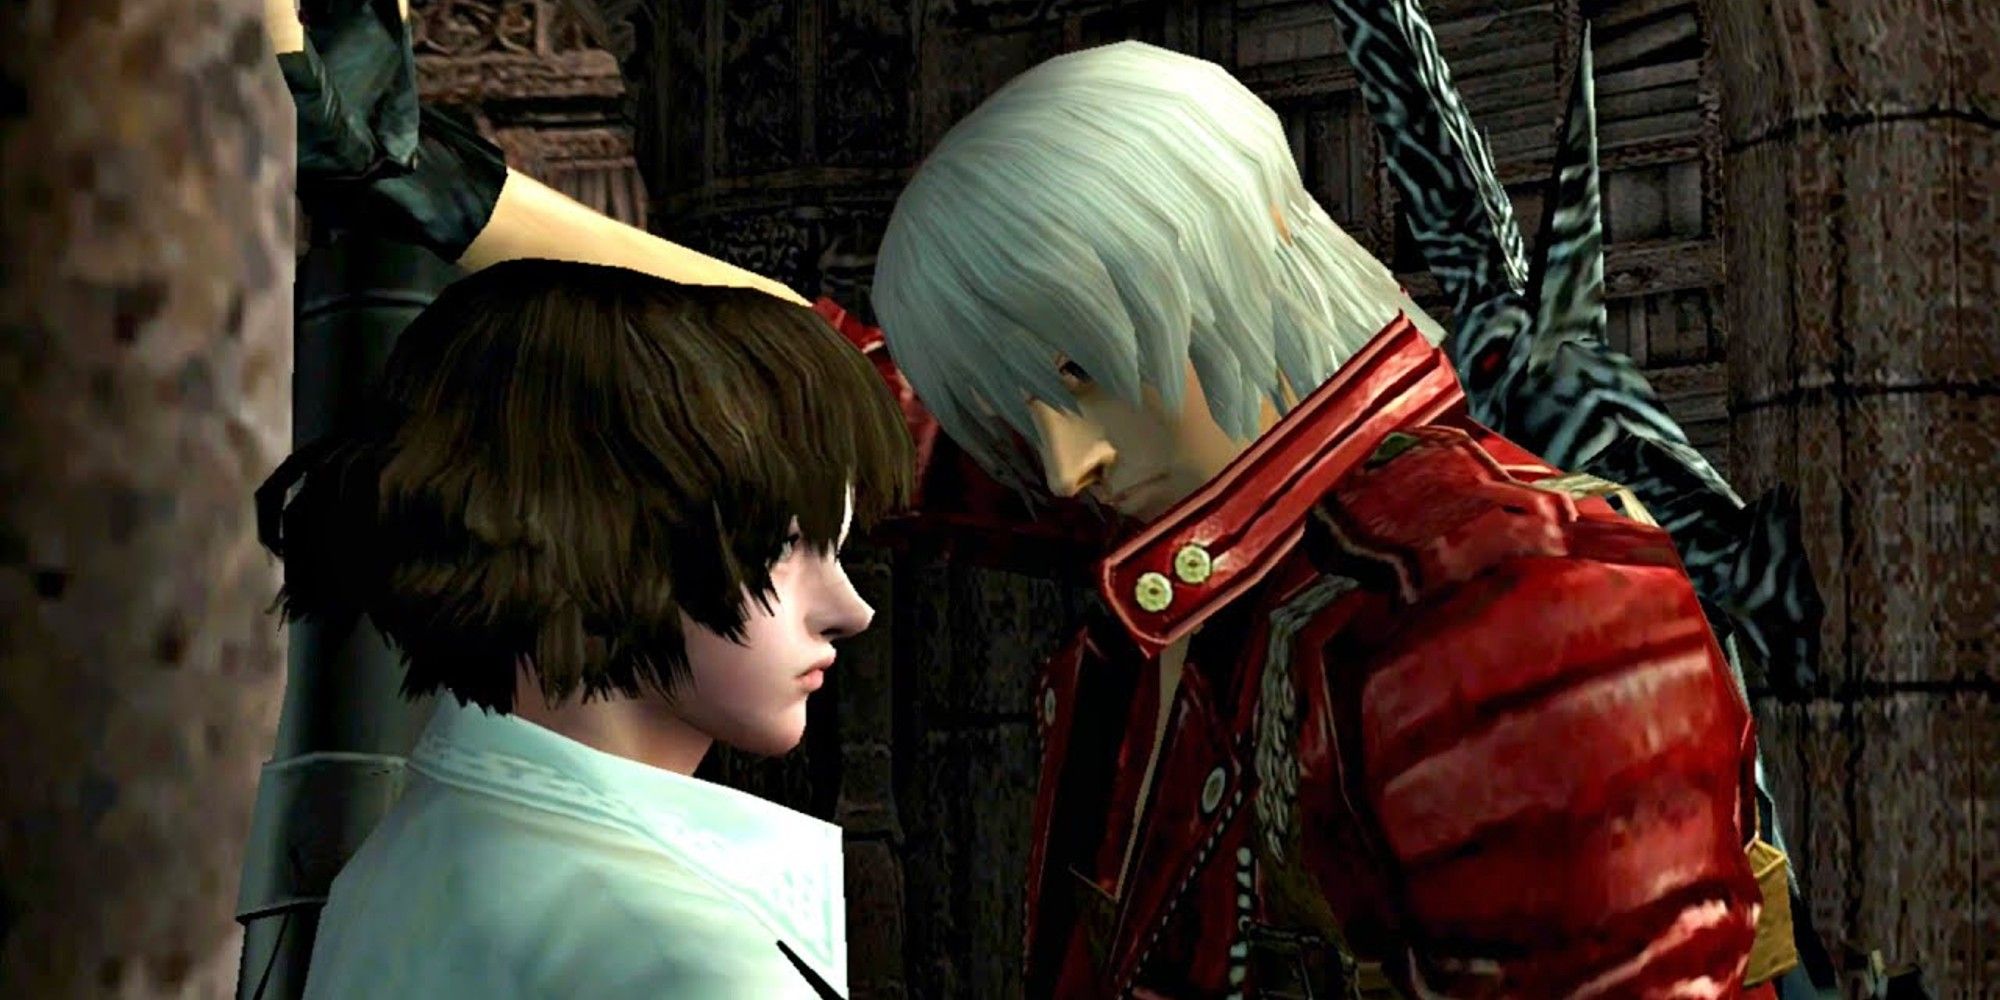 Dante presses Lady against the wall on the left - Devil May Cry 3